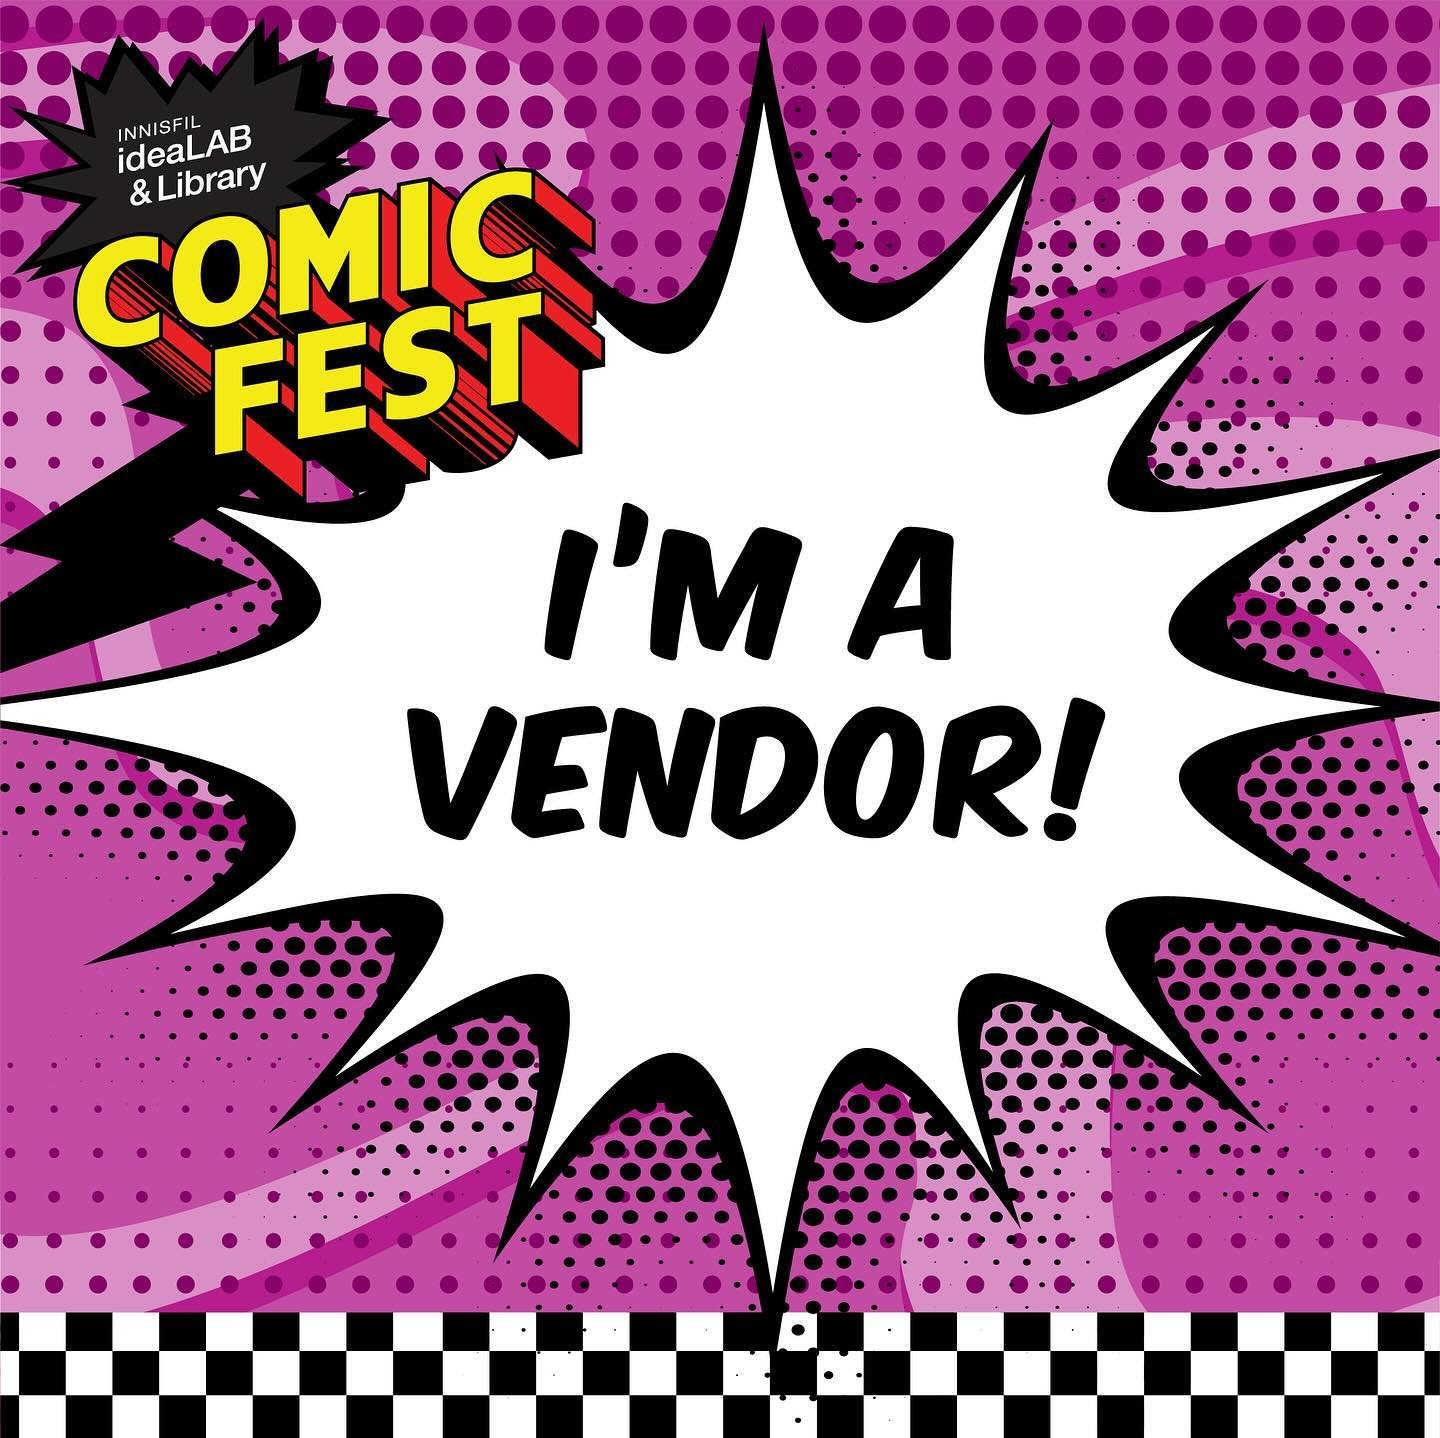 We are super excited to be apart of the Innisfil ComicFEST!!! Come drop by our booth and let us know ur thoughts on comics and what you would like to see us work on. #comics 
https://www.innisfilidealab.ca/comicfest/